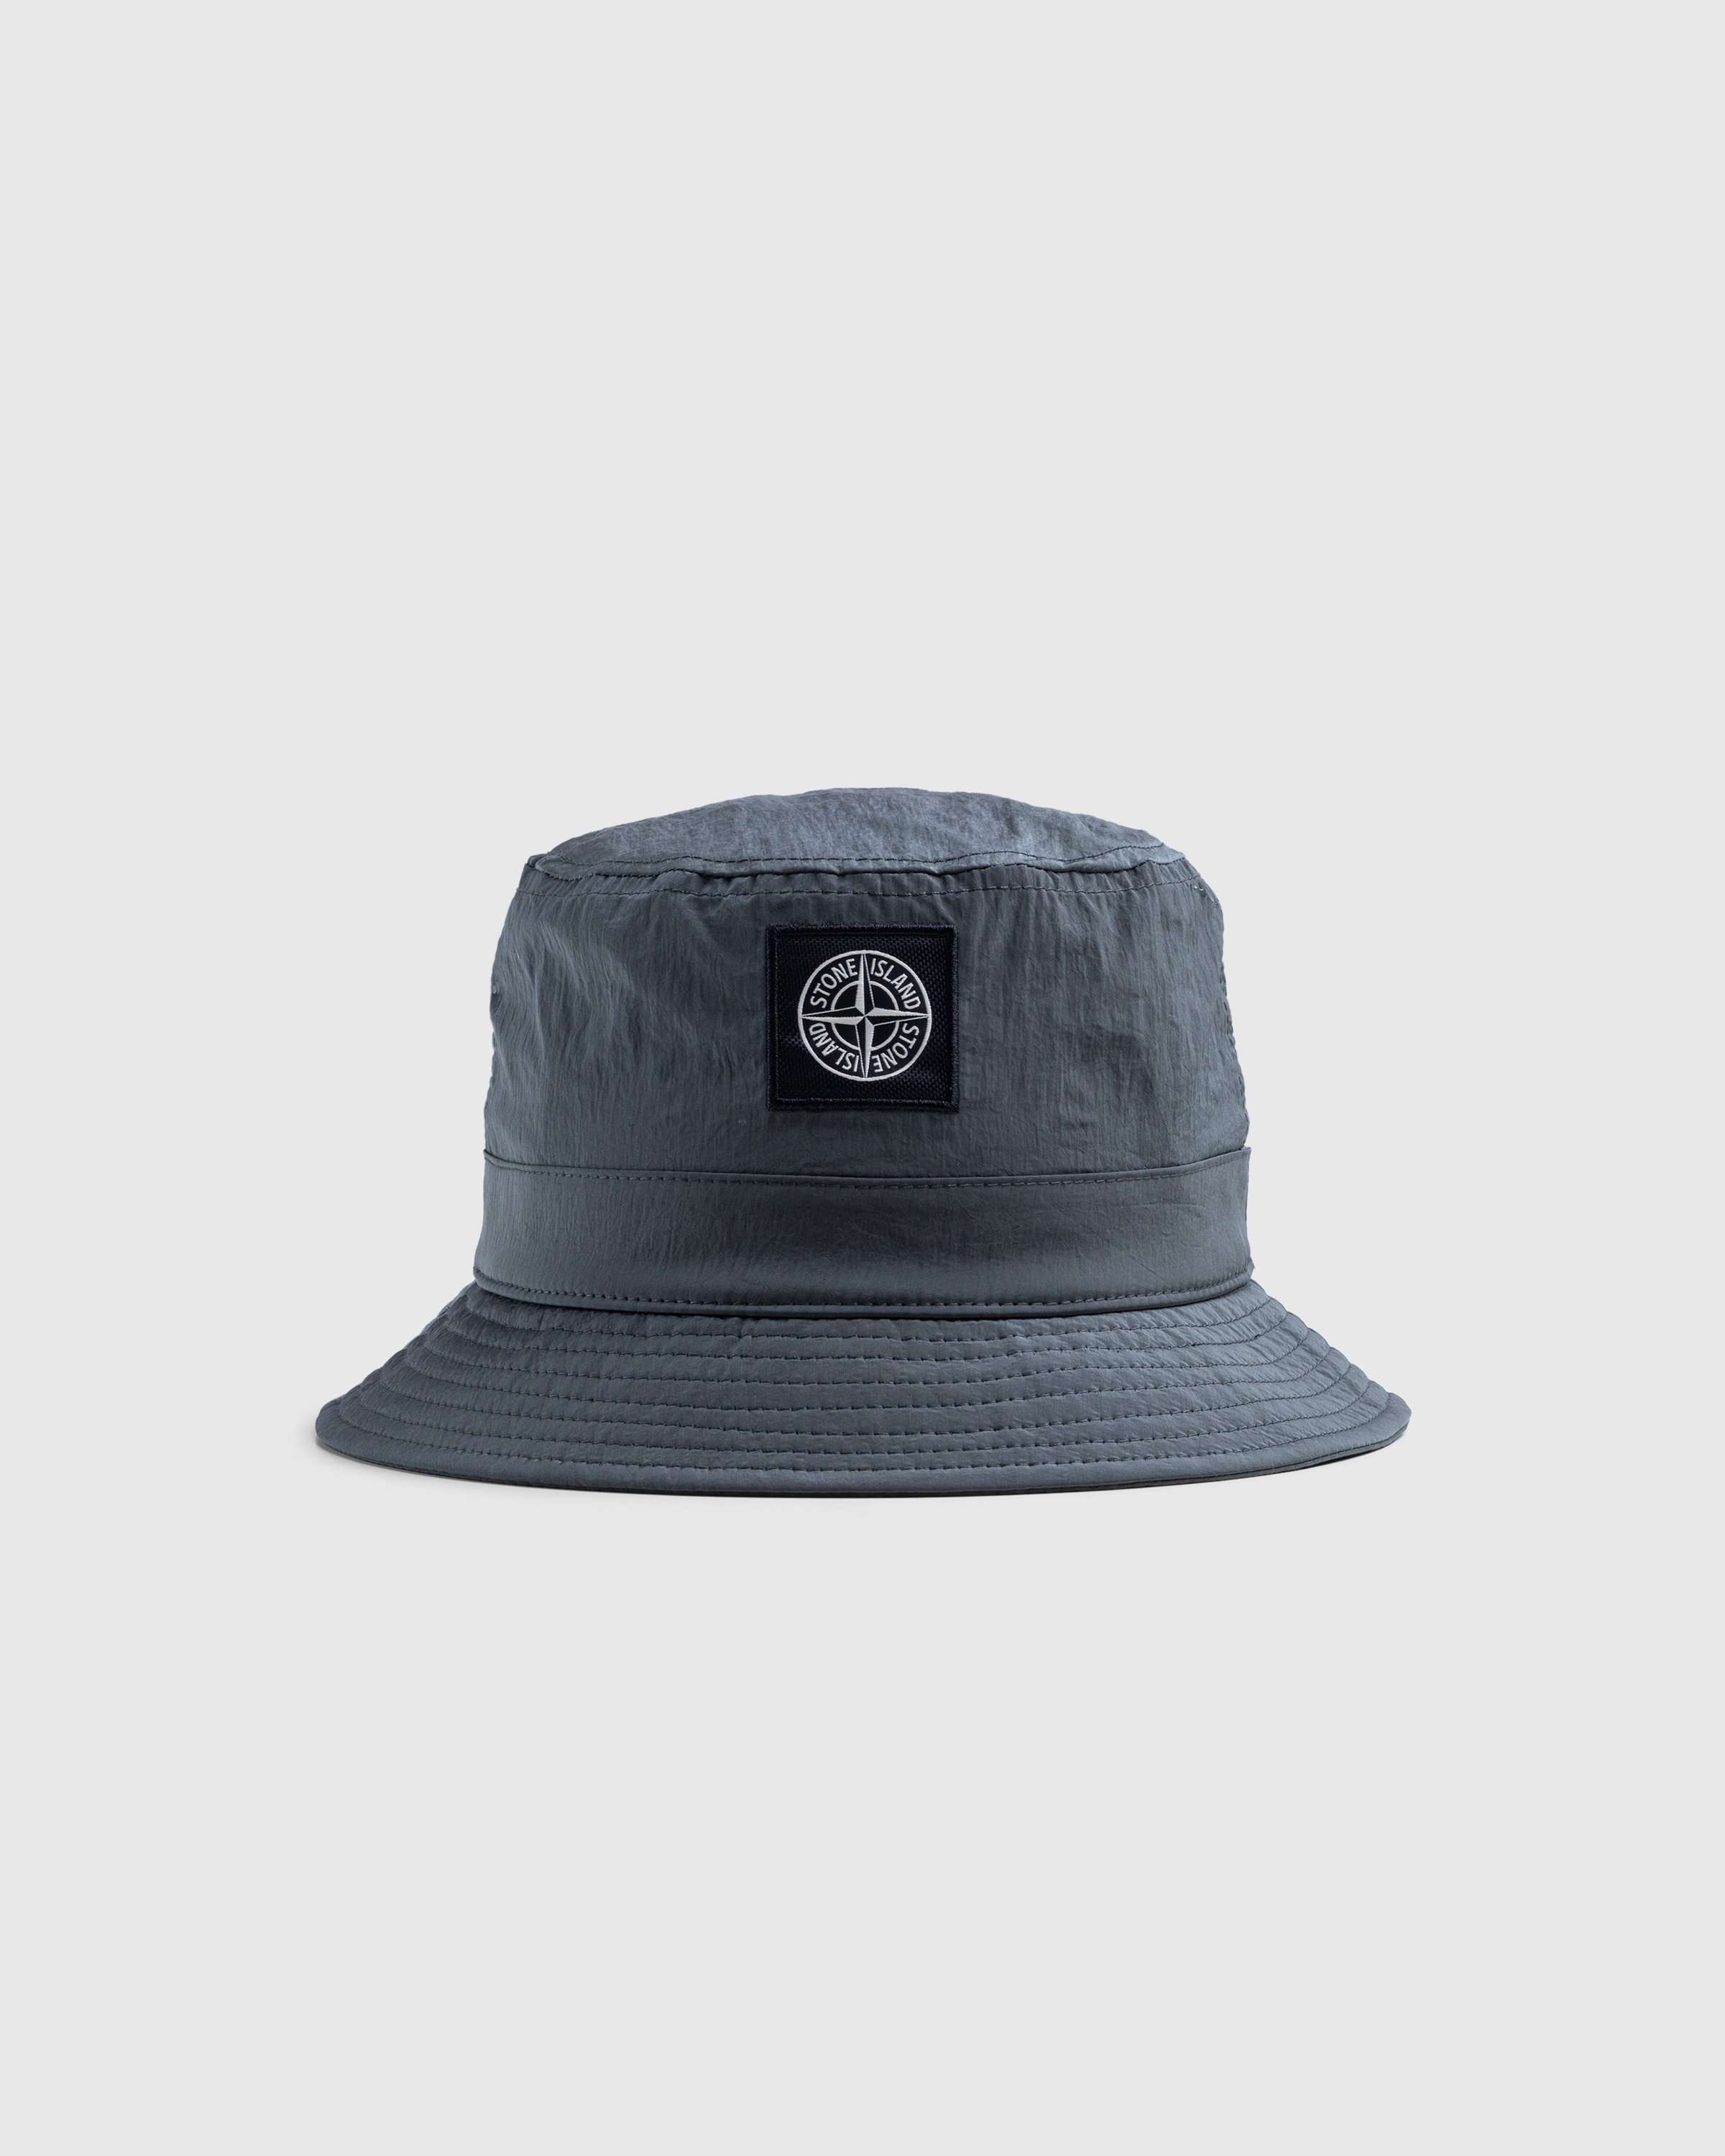 Stone Island - HAT MUSK - Accessories - Green - Image 1